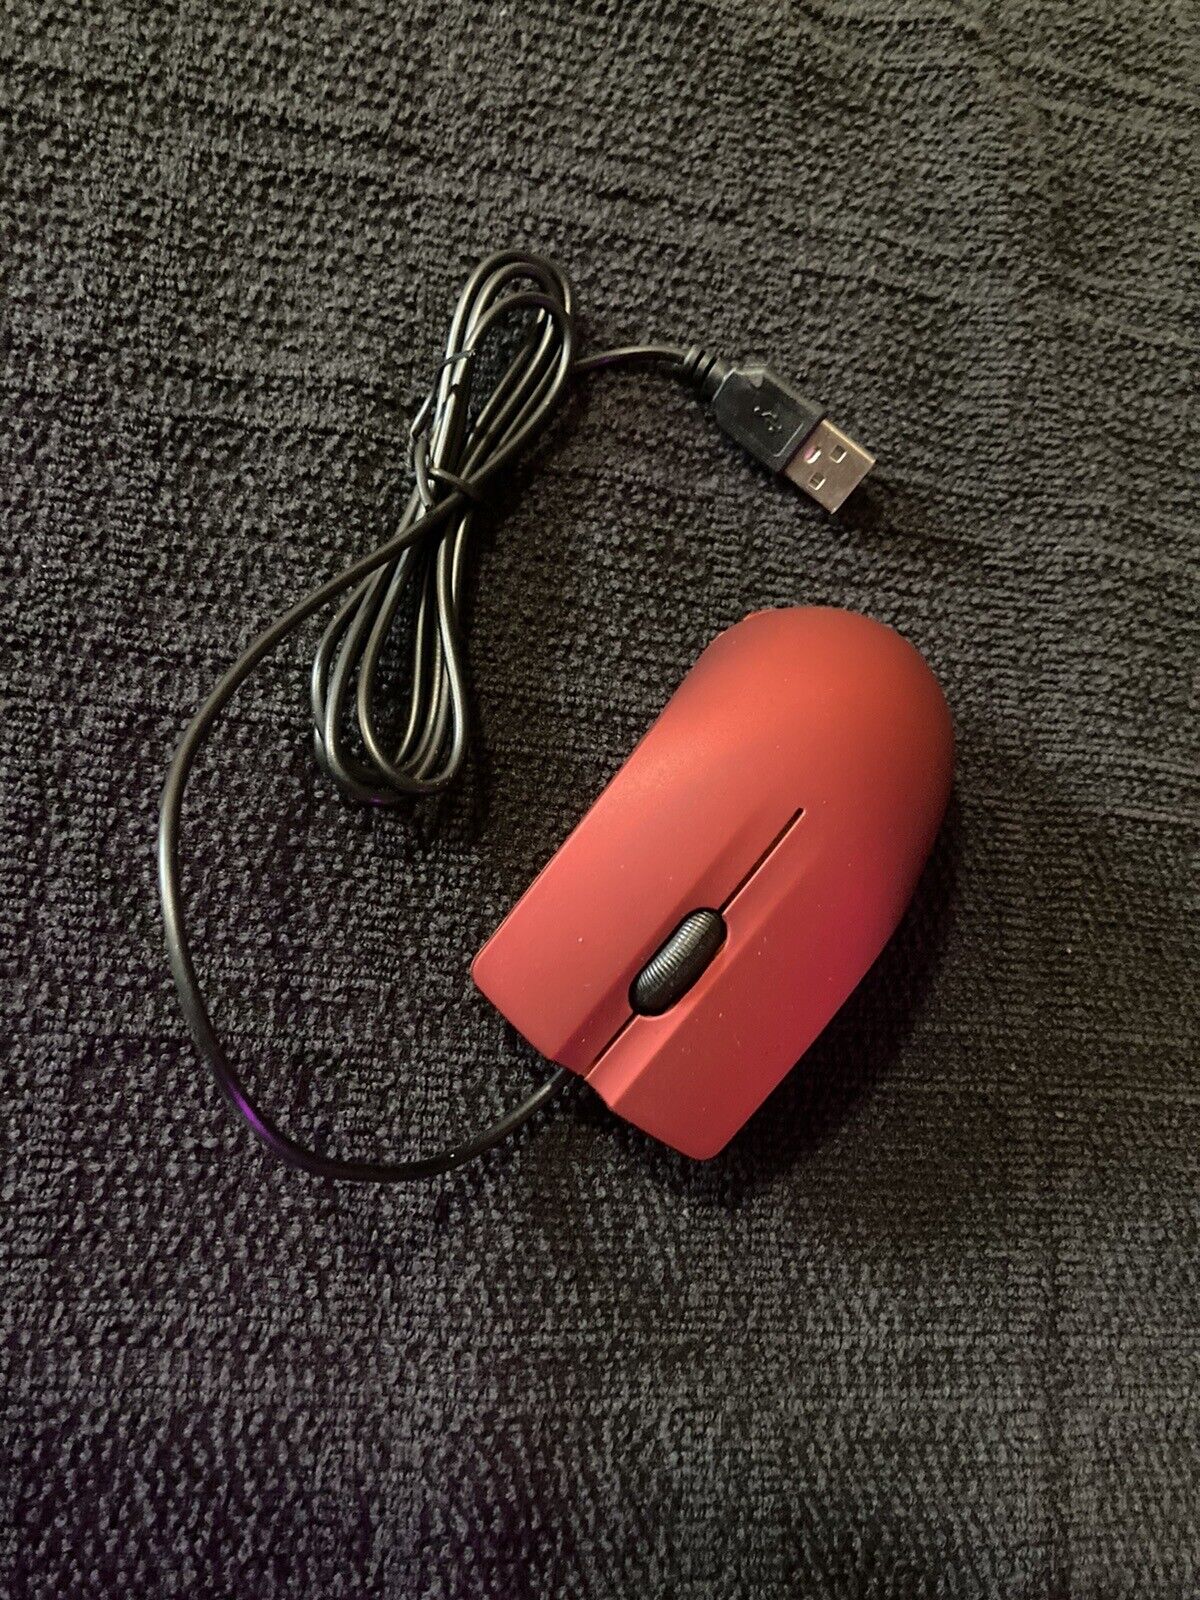 PACKAGE OF 6 (SIX) usb wired computer mouse